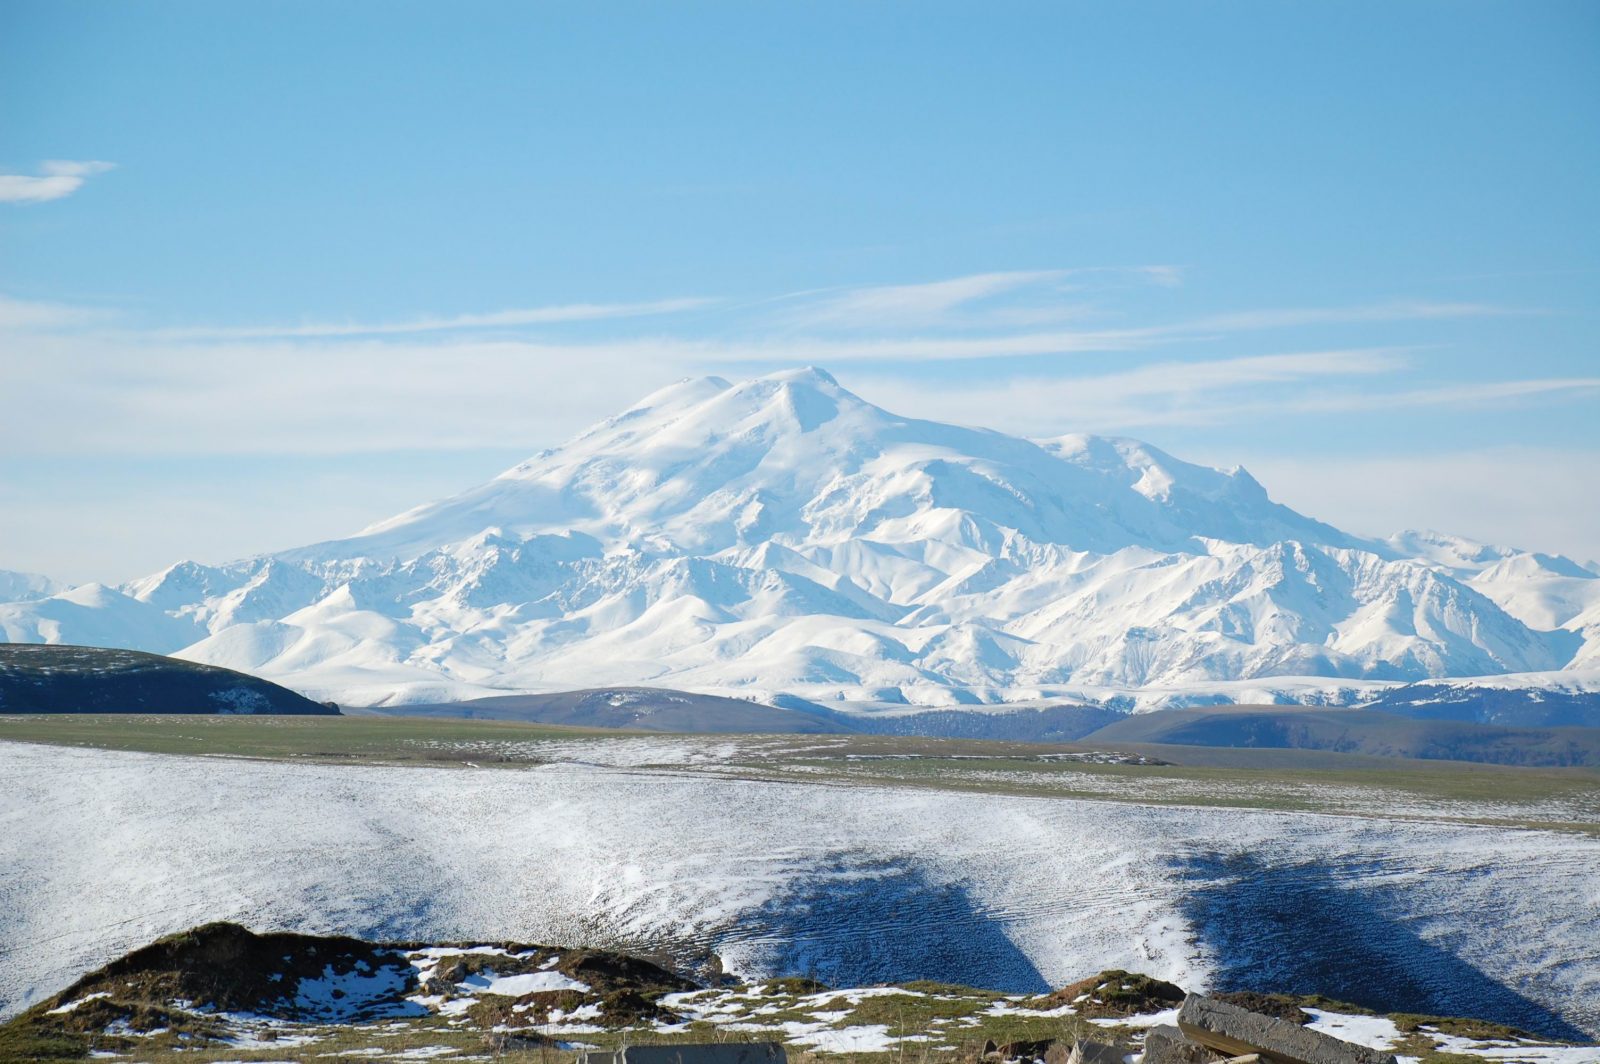 Here Are 24 Glorious Natural Attractions – Can You Match Them to Their Country? Mount Elbrus